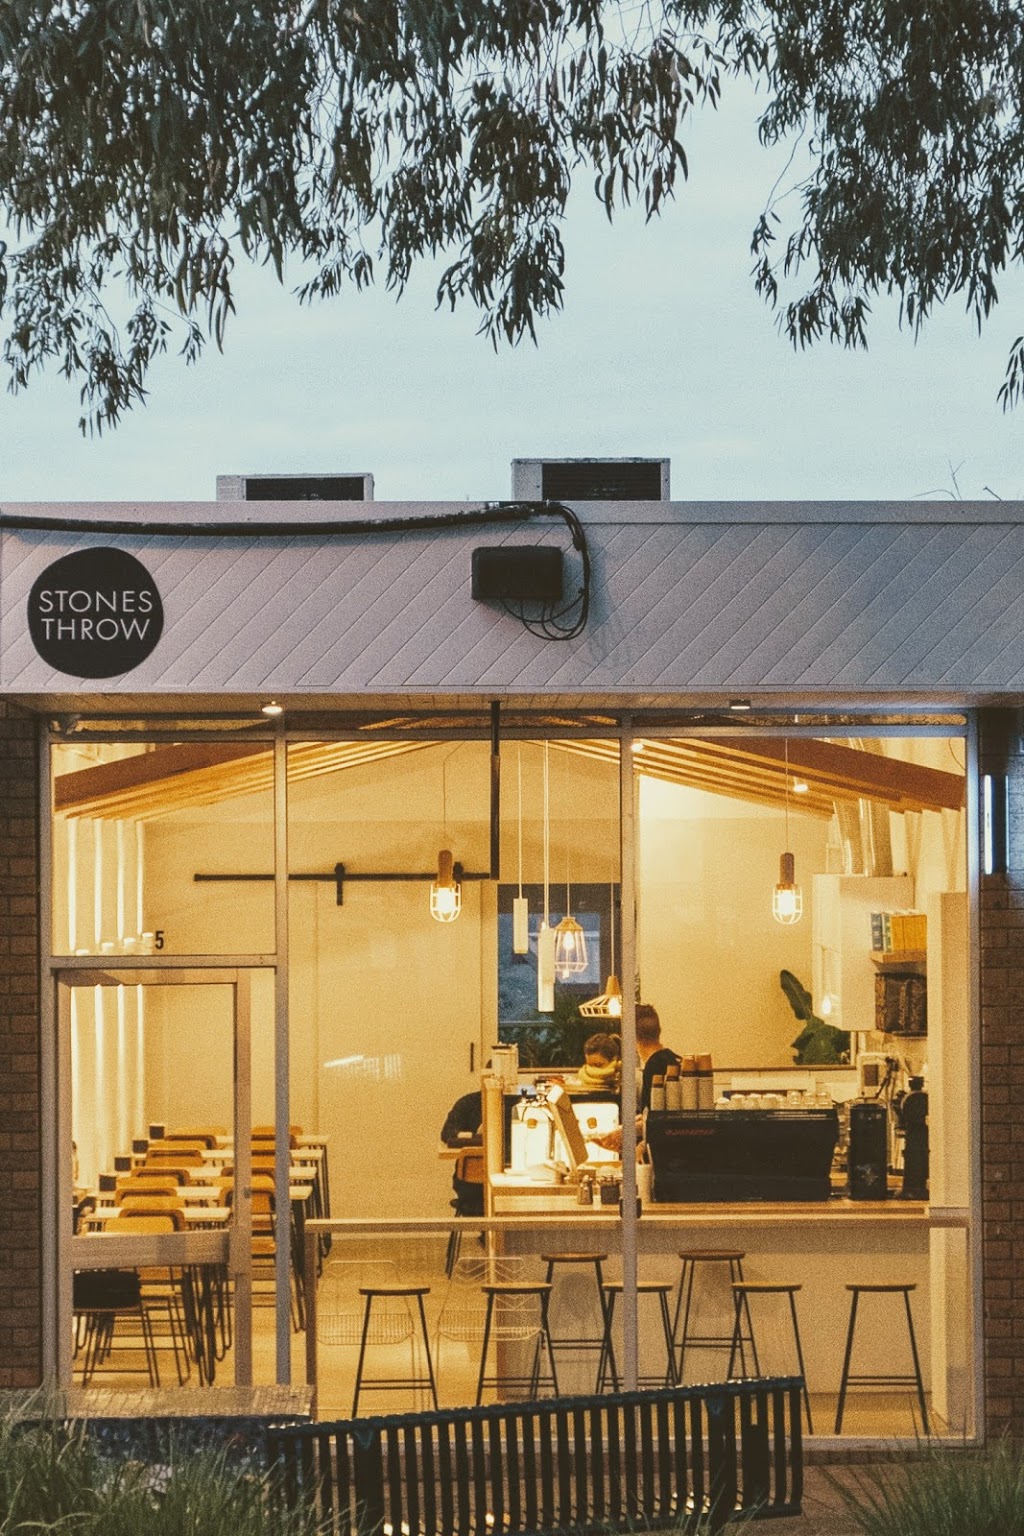 Stones Throw Cafe | cafe | 5 Were St, Montmorency VIC 3094, Australia | 0480260438 OR +61 480 260 438